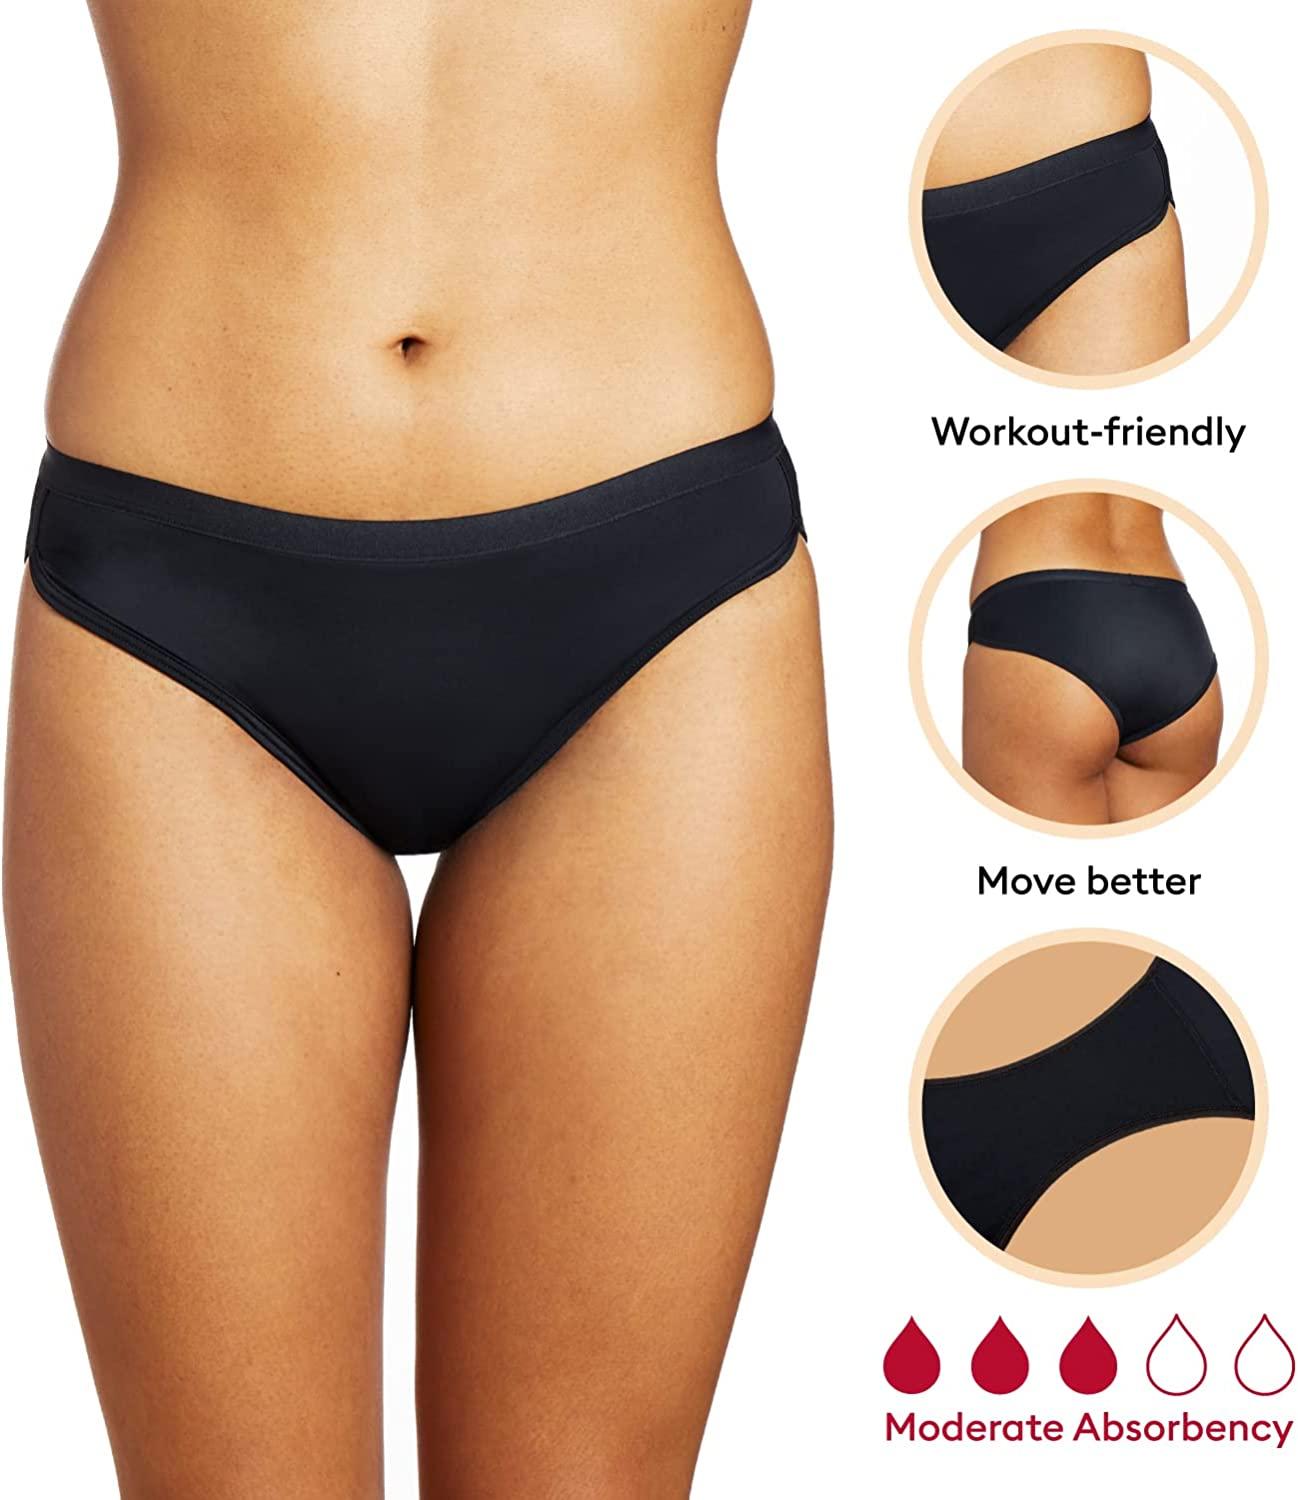 Women's Period Underwear Mid-rised Hipster Panties, Available In